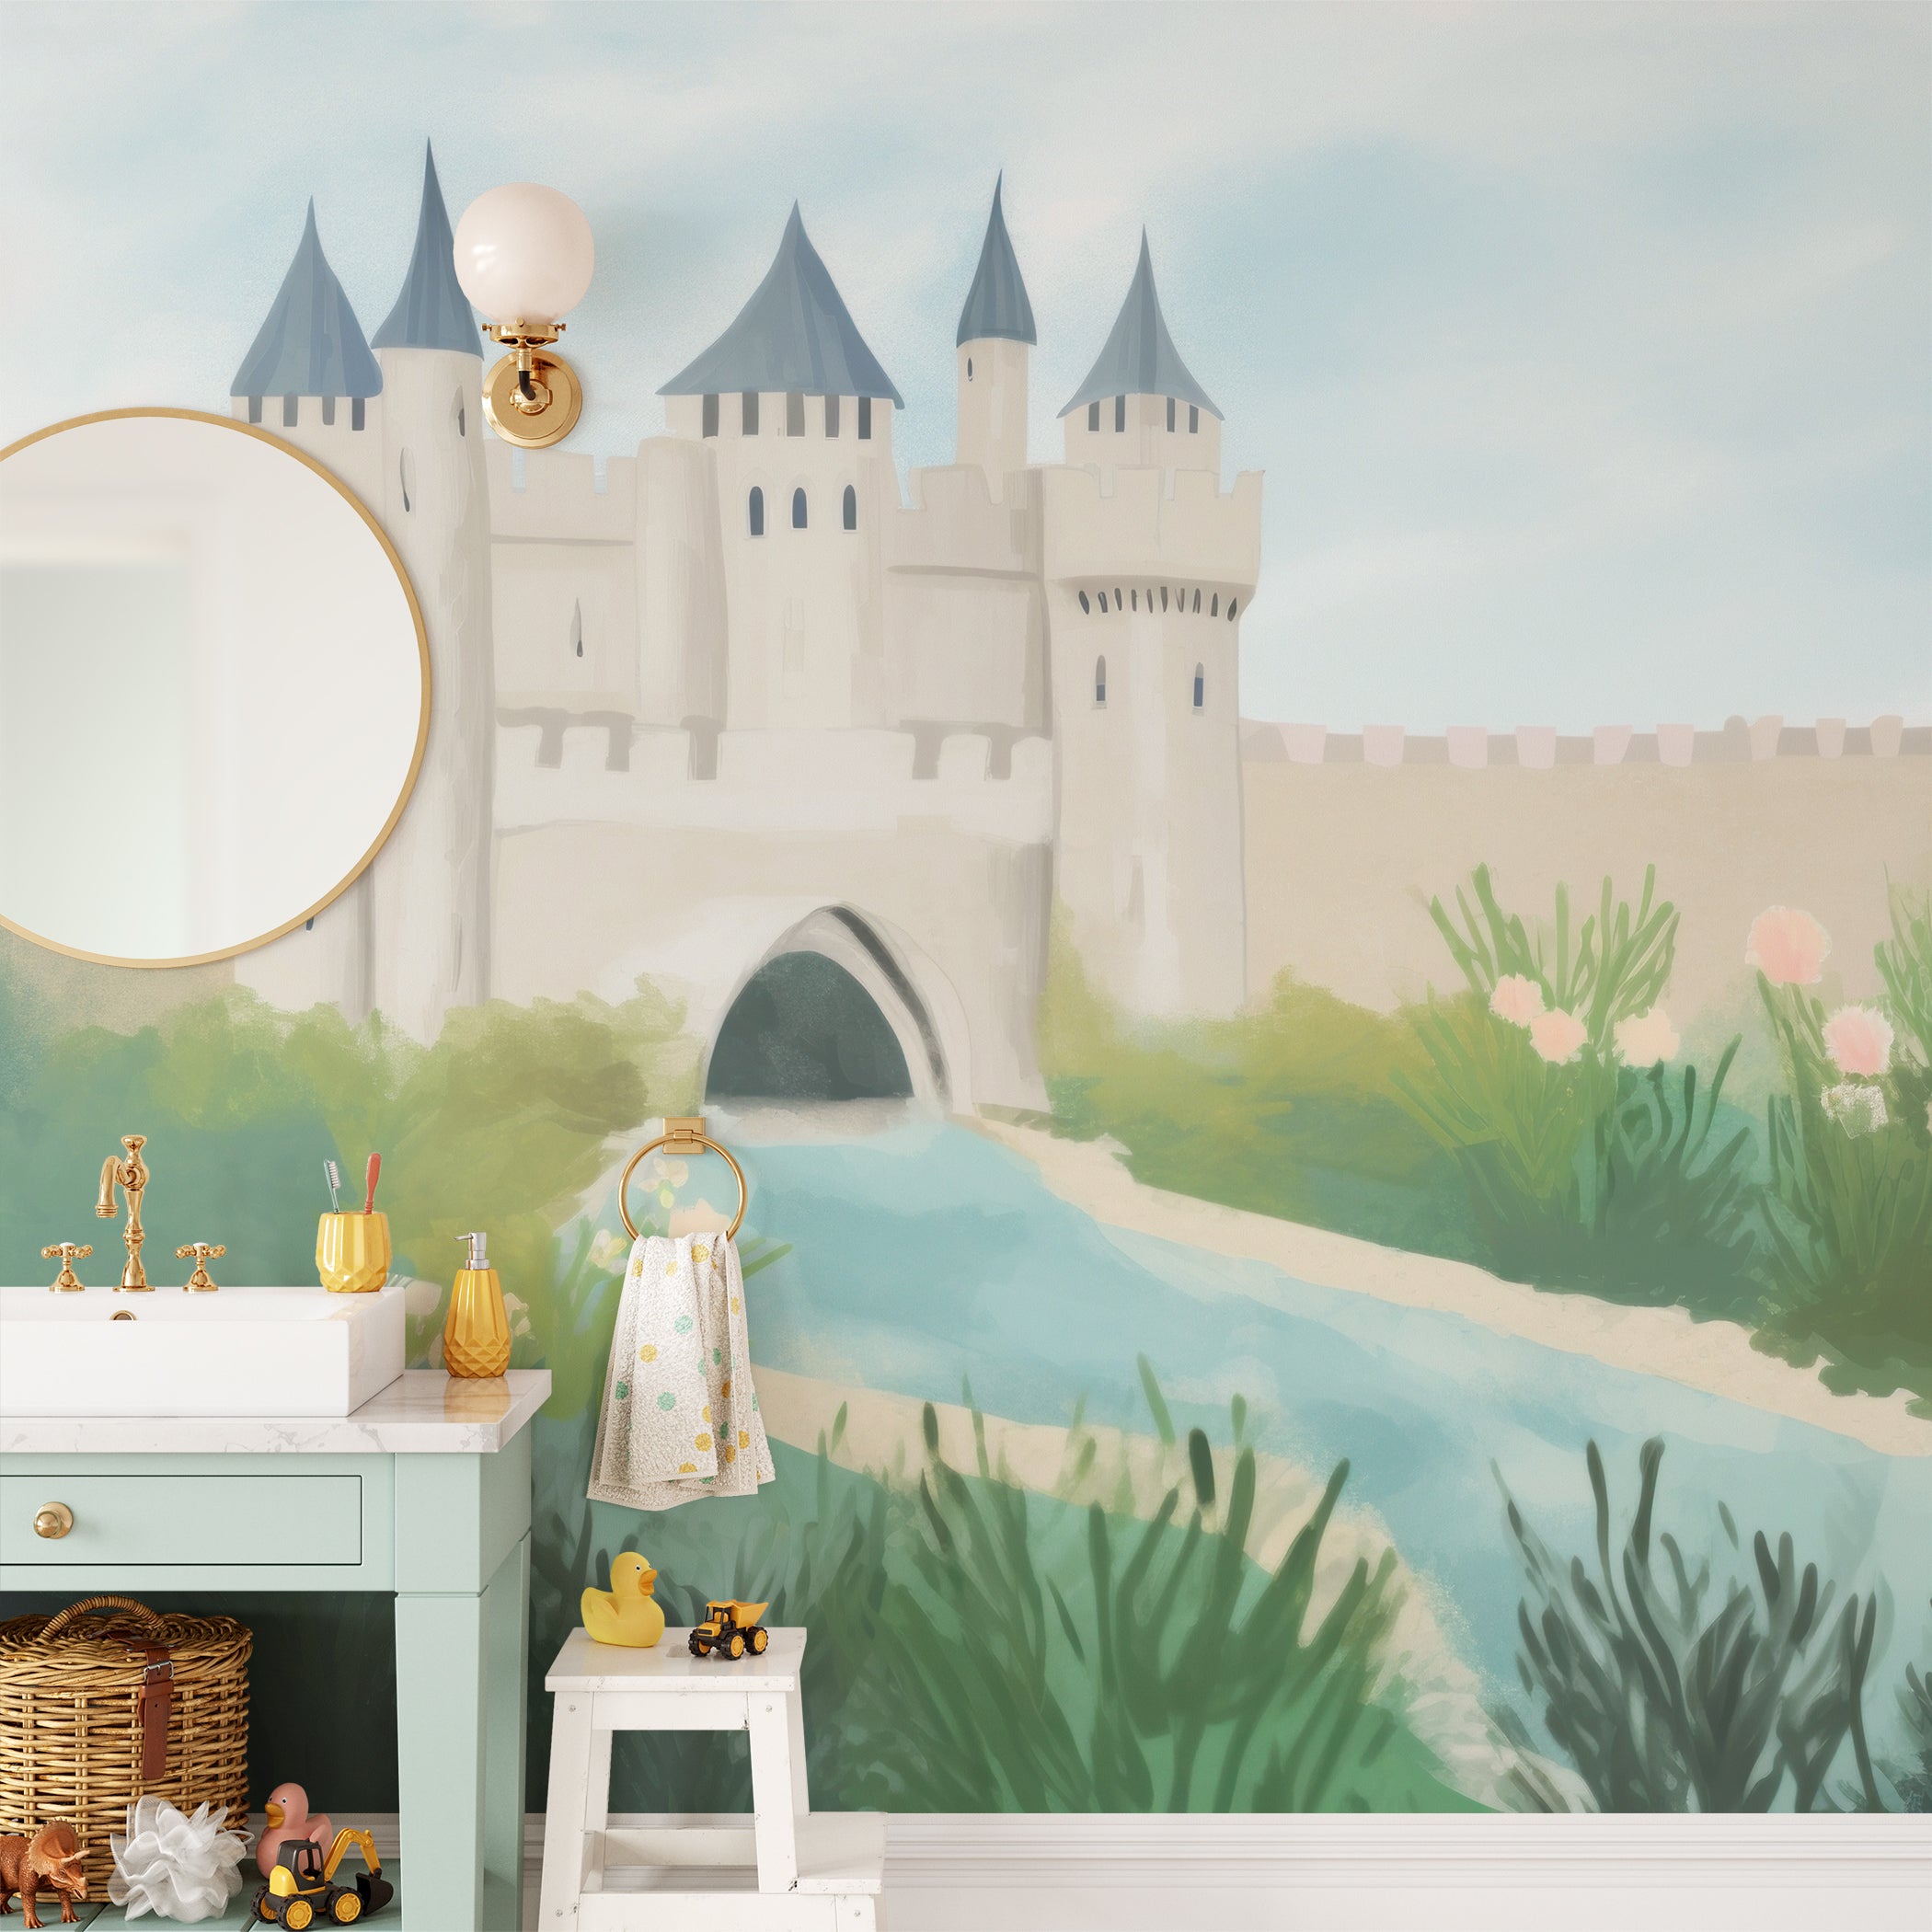 A children's room decorated with a large mural of a castle. The mural features a picturesque castle with blue-roofed towers, a flowing river, and surrounding greenery, creating an enchanting and adventurous atmosphere.